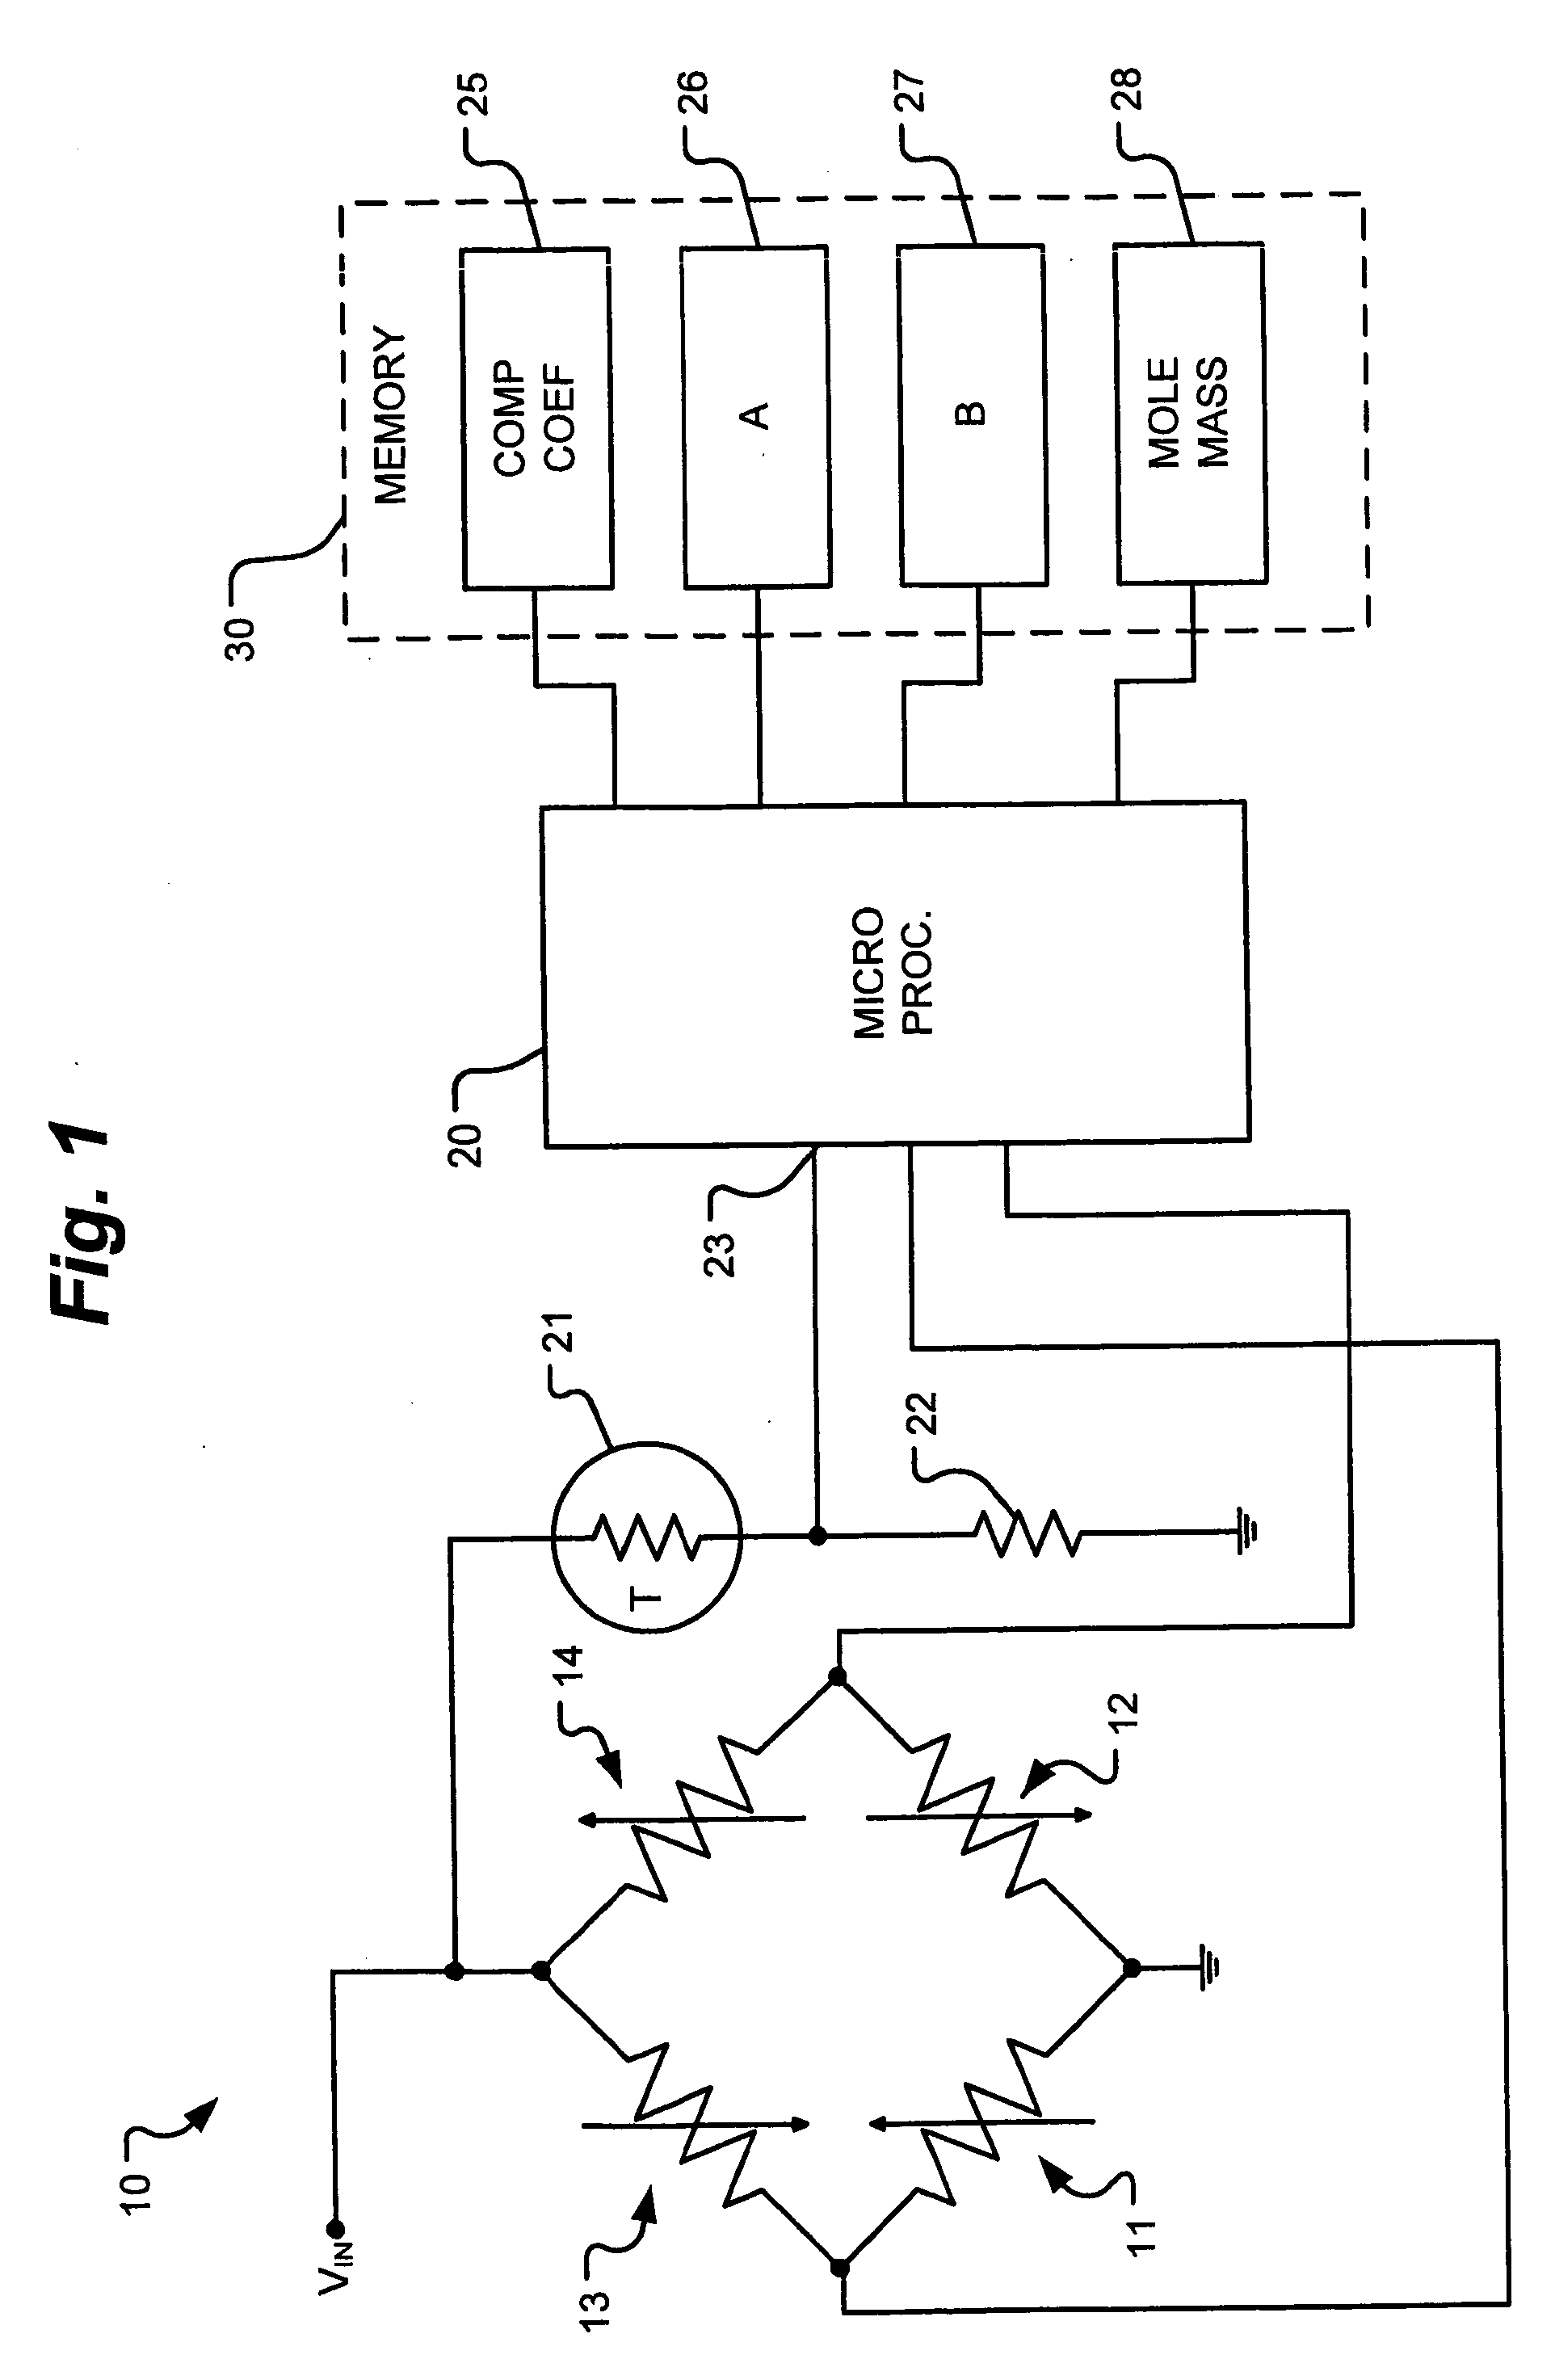 Gas density transducer with a microprocessor executing an algorithm solving van der waals equation